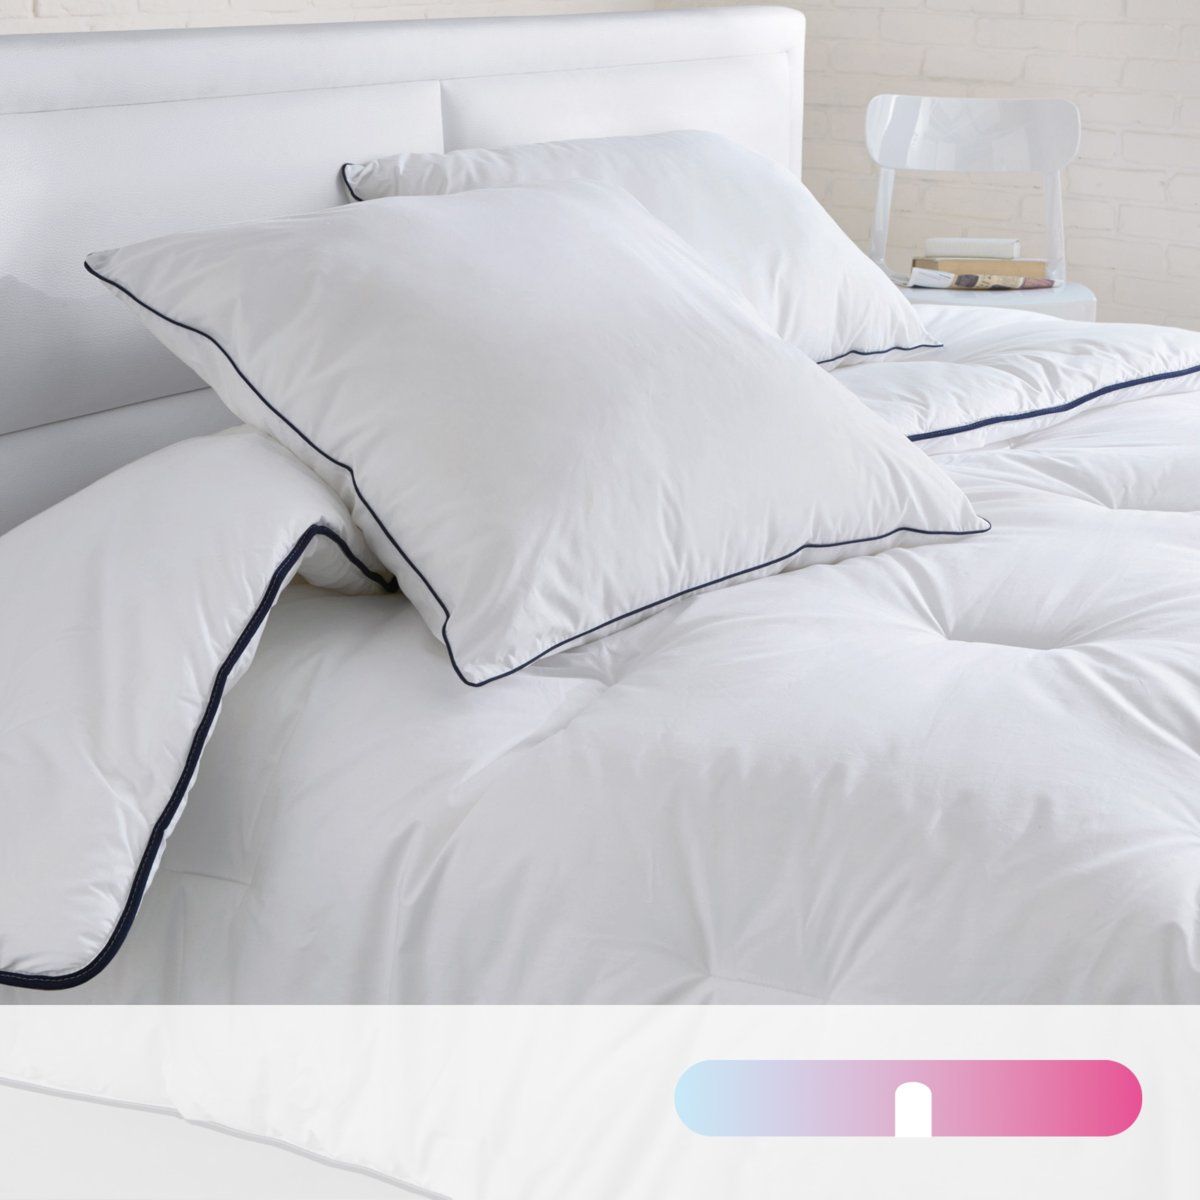 Couette 100% polyester 300g/m², traitée Phytopure